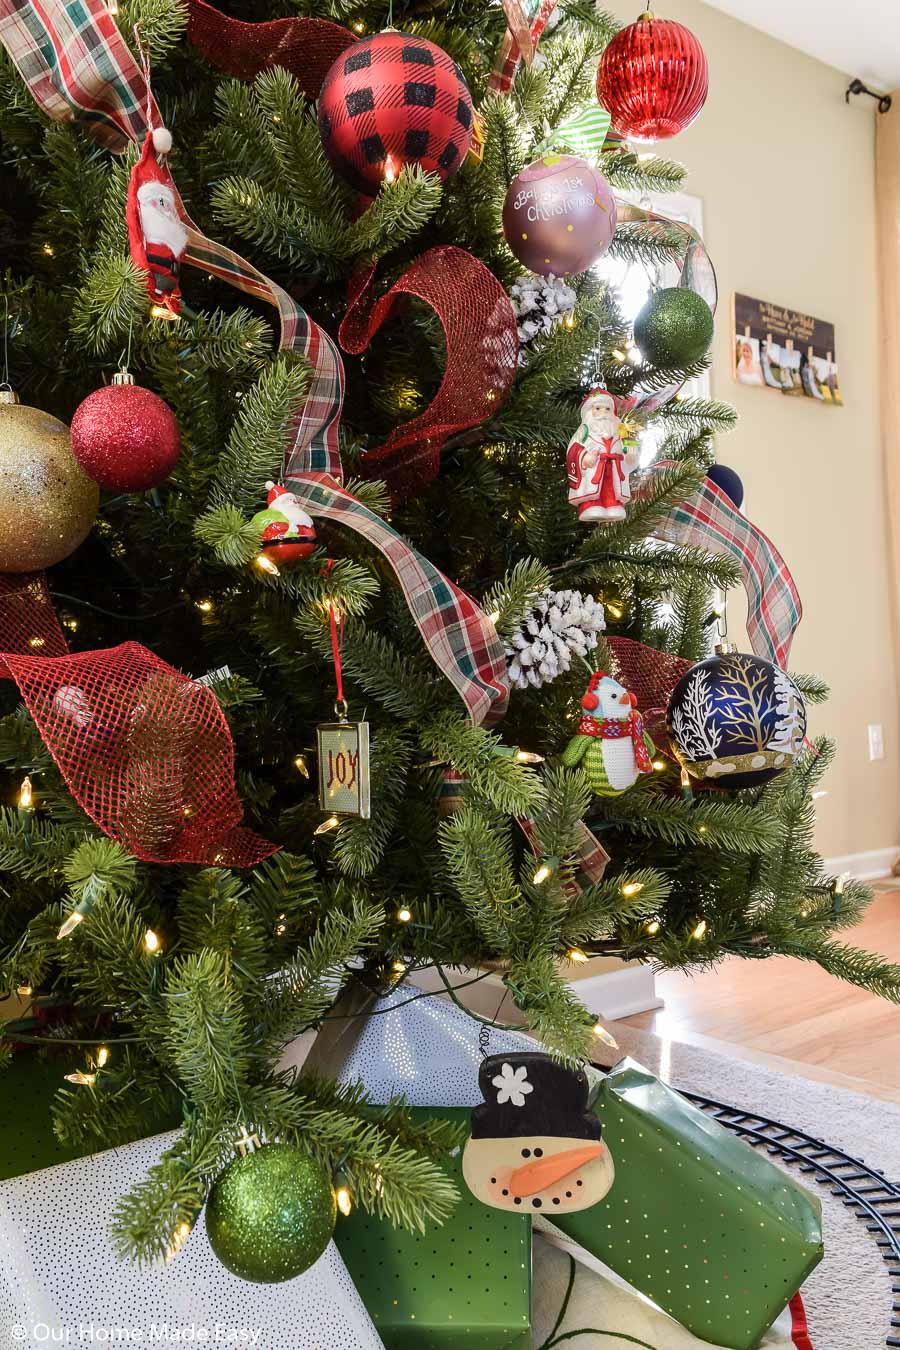 We decorated our Christmas tree with red and black buffalo check ribbon, and red mesh ribbon, along with our family ornaments